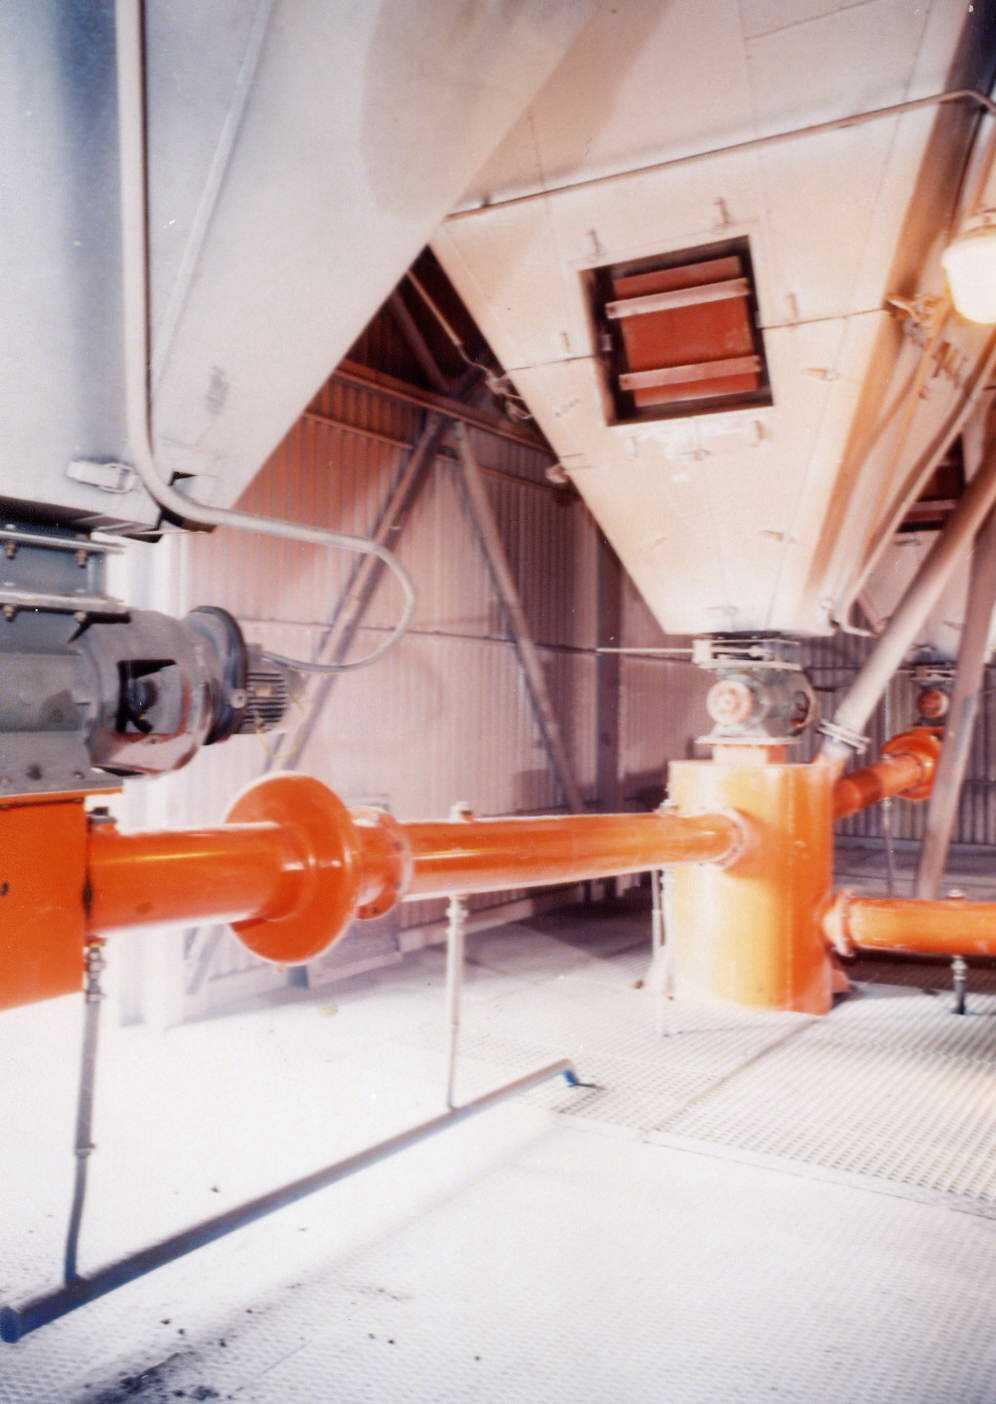 5 from a system of fluid conveyors putting filter hoppers through and leading fly-ash into a collector. There is a divertor located under it.